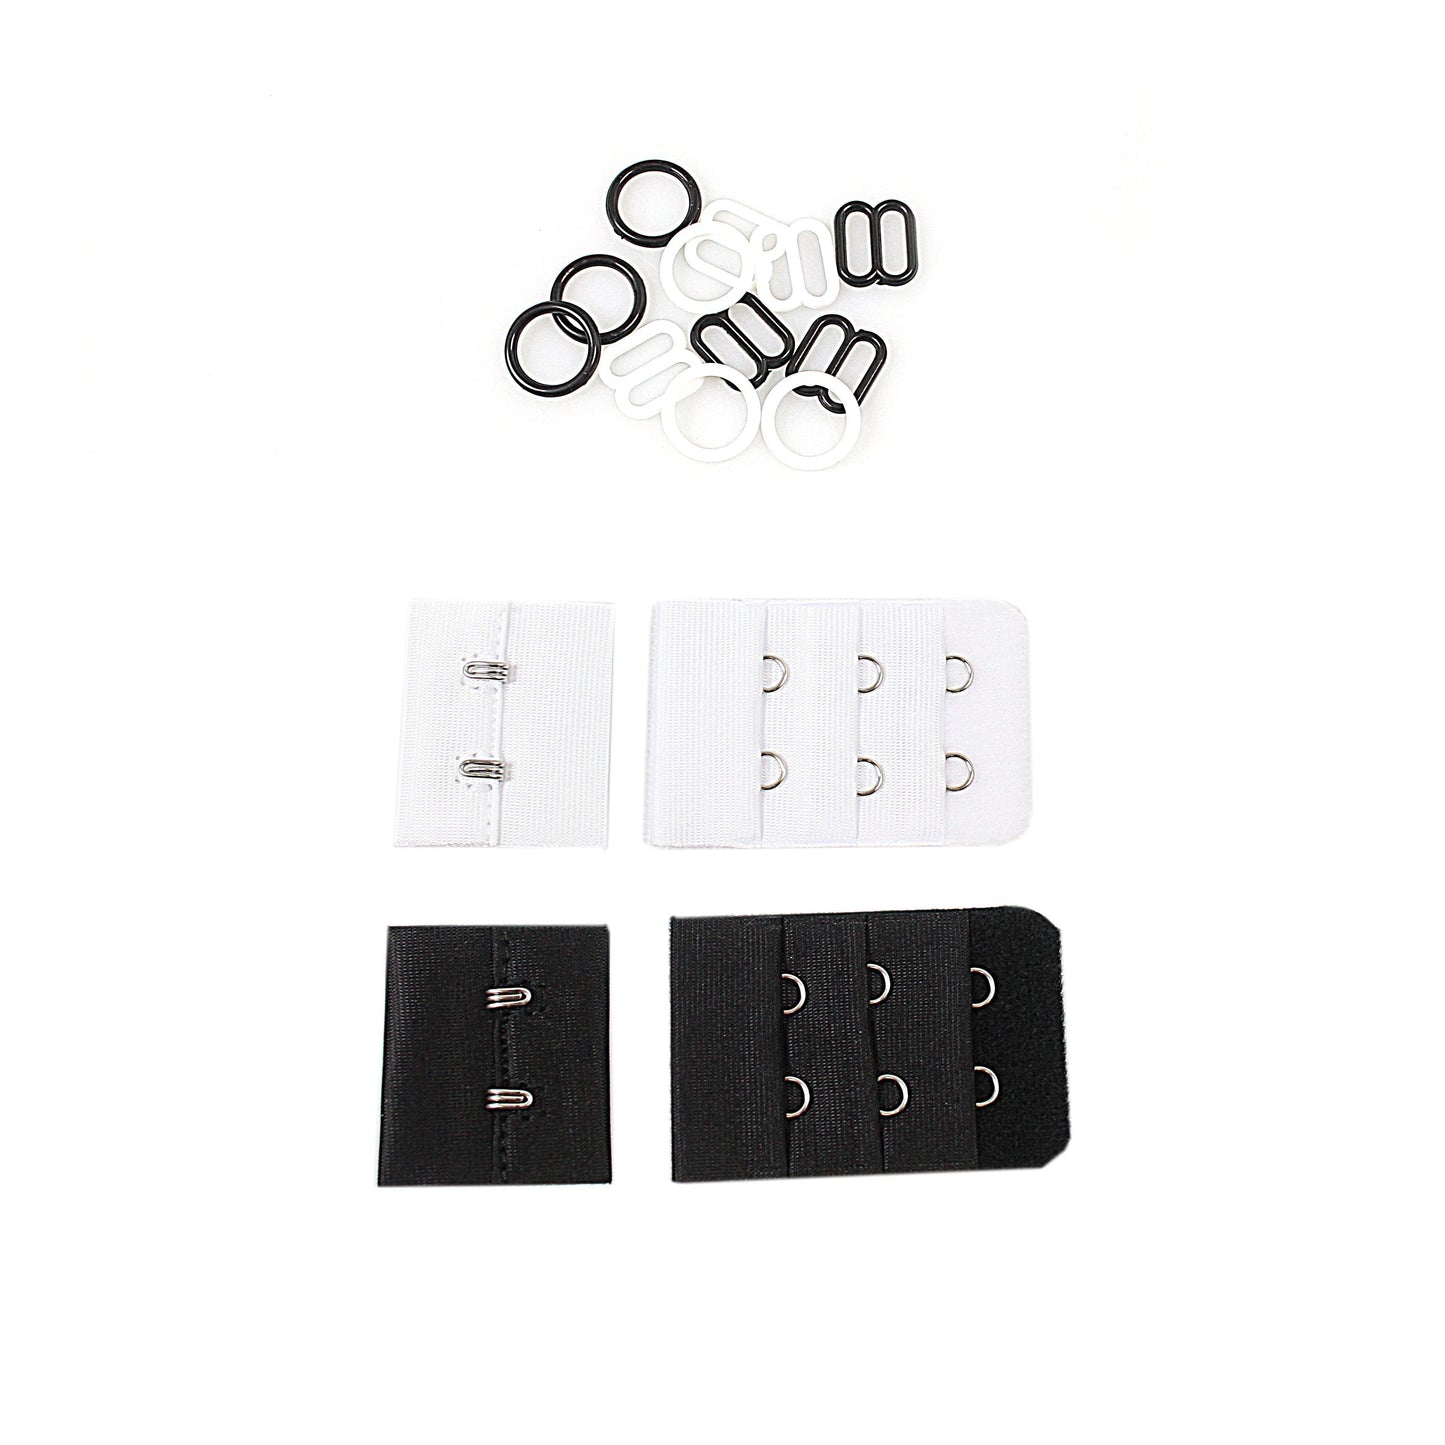 Assorted Bra Buckle Elastic Buckle Set Black And White 4808 (Large Letter Rate)